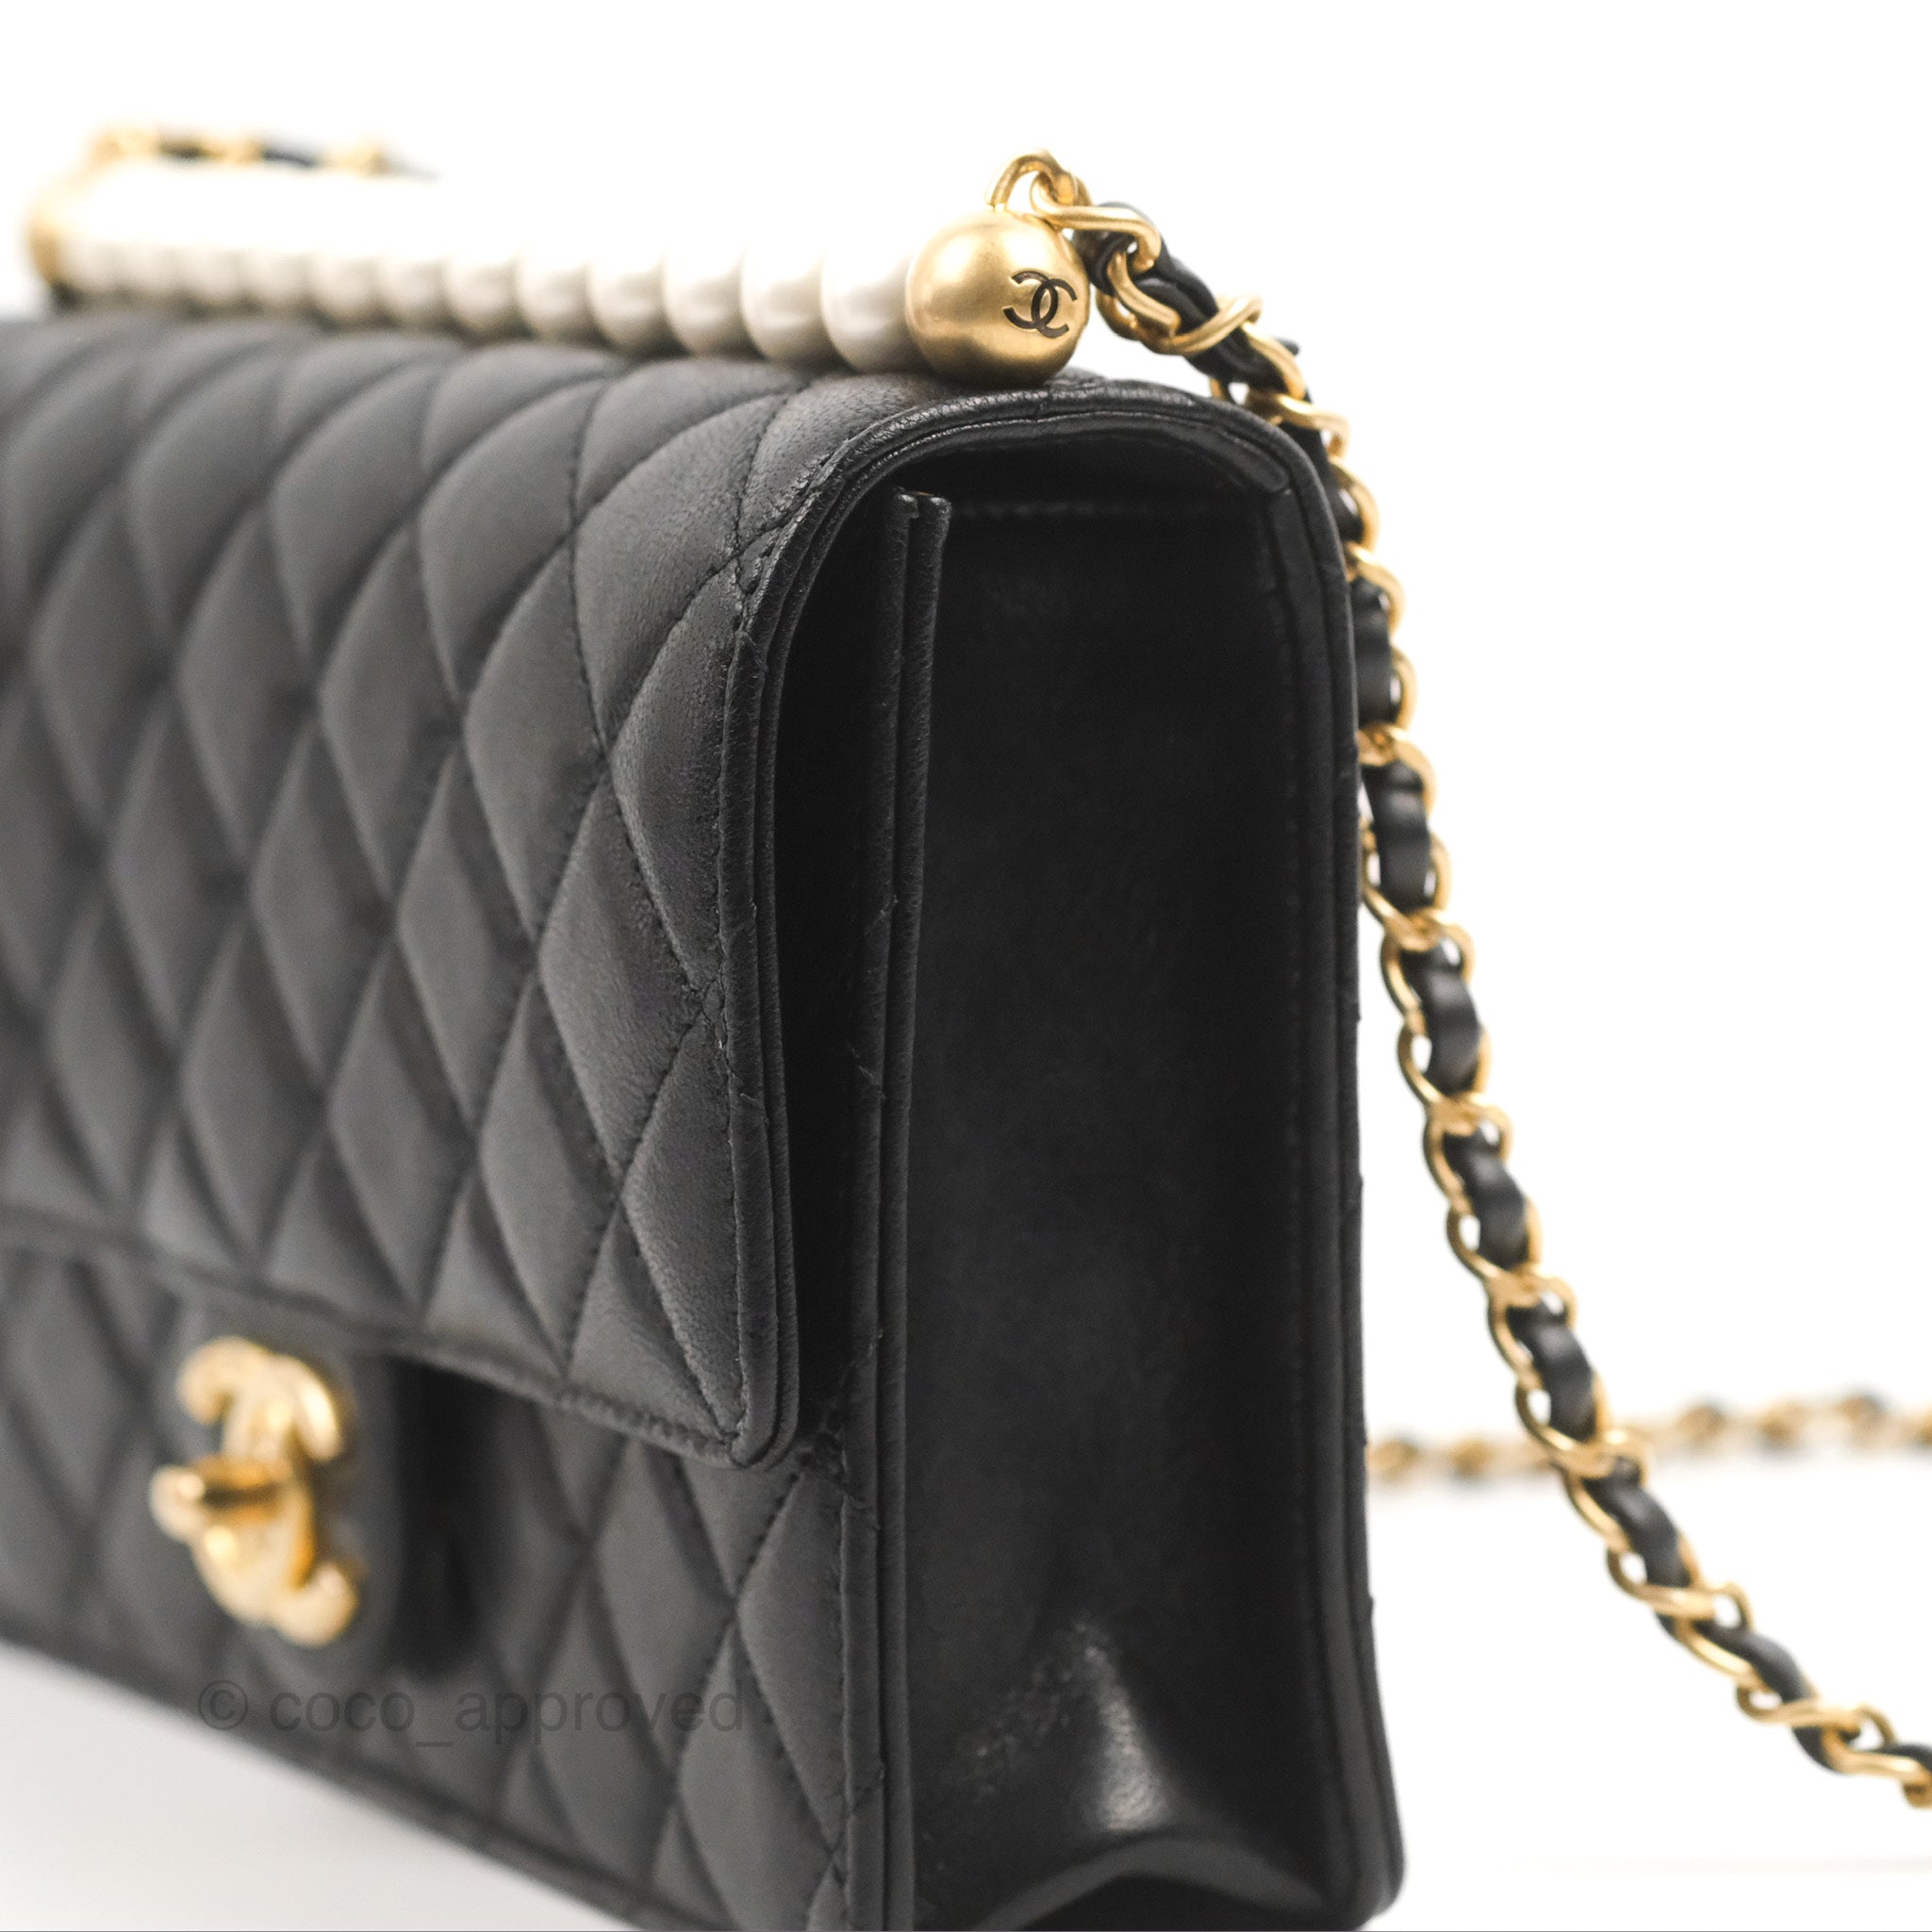 Chanel Black Quilted Leather Chic Pearls Flap Bag Chanel